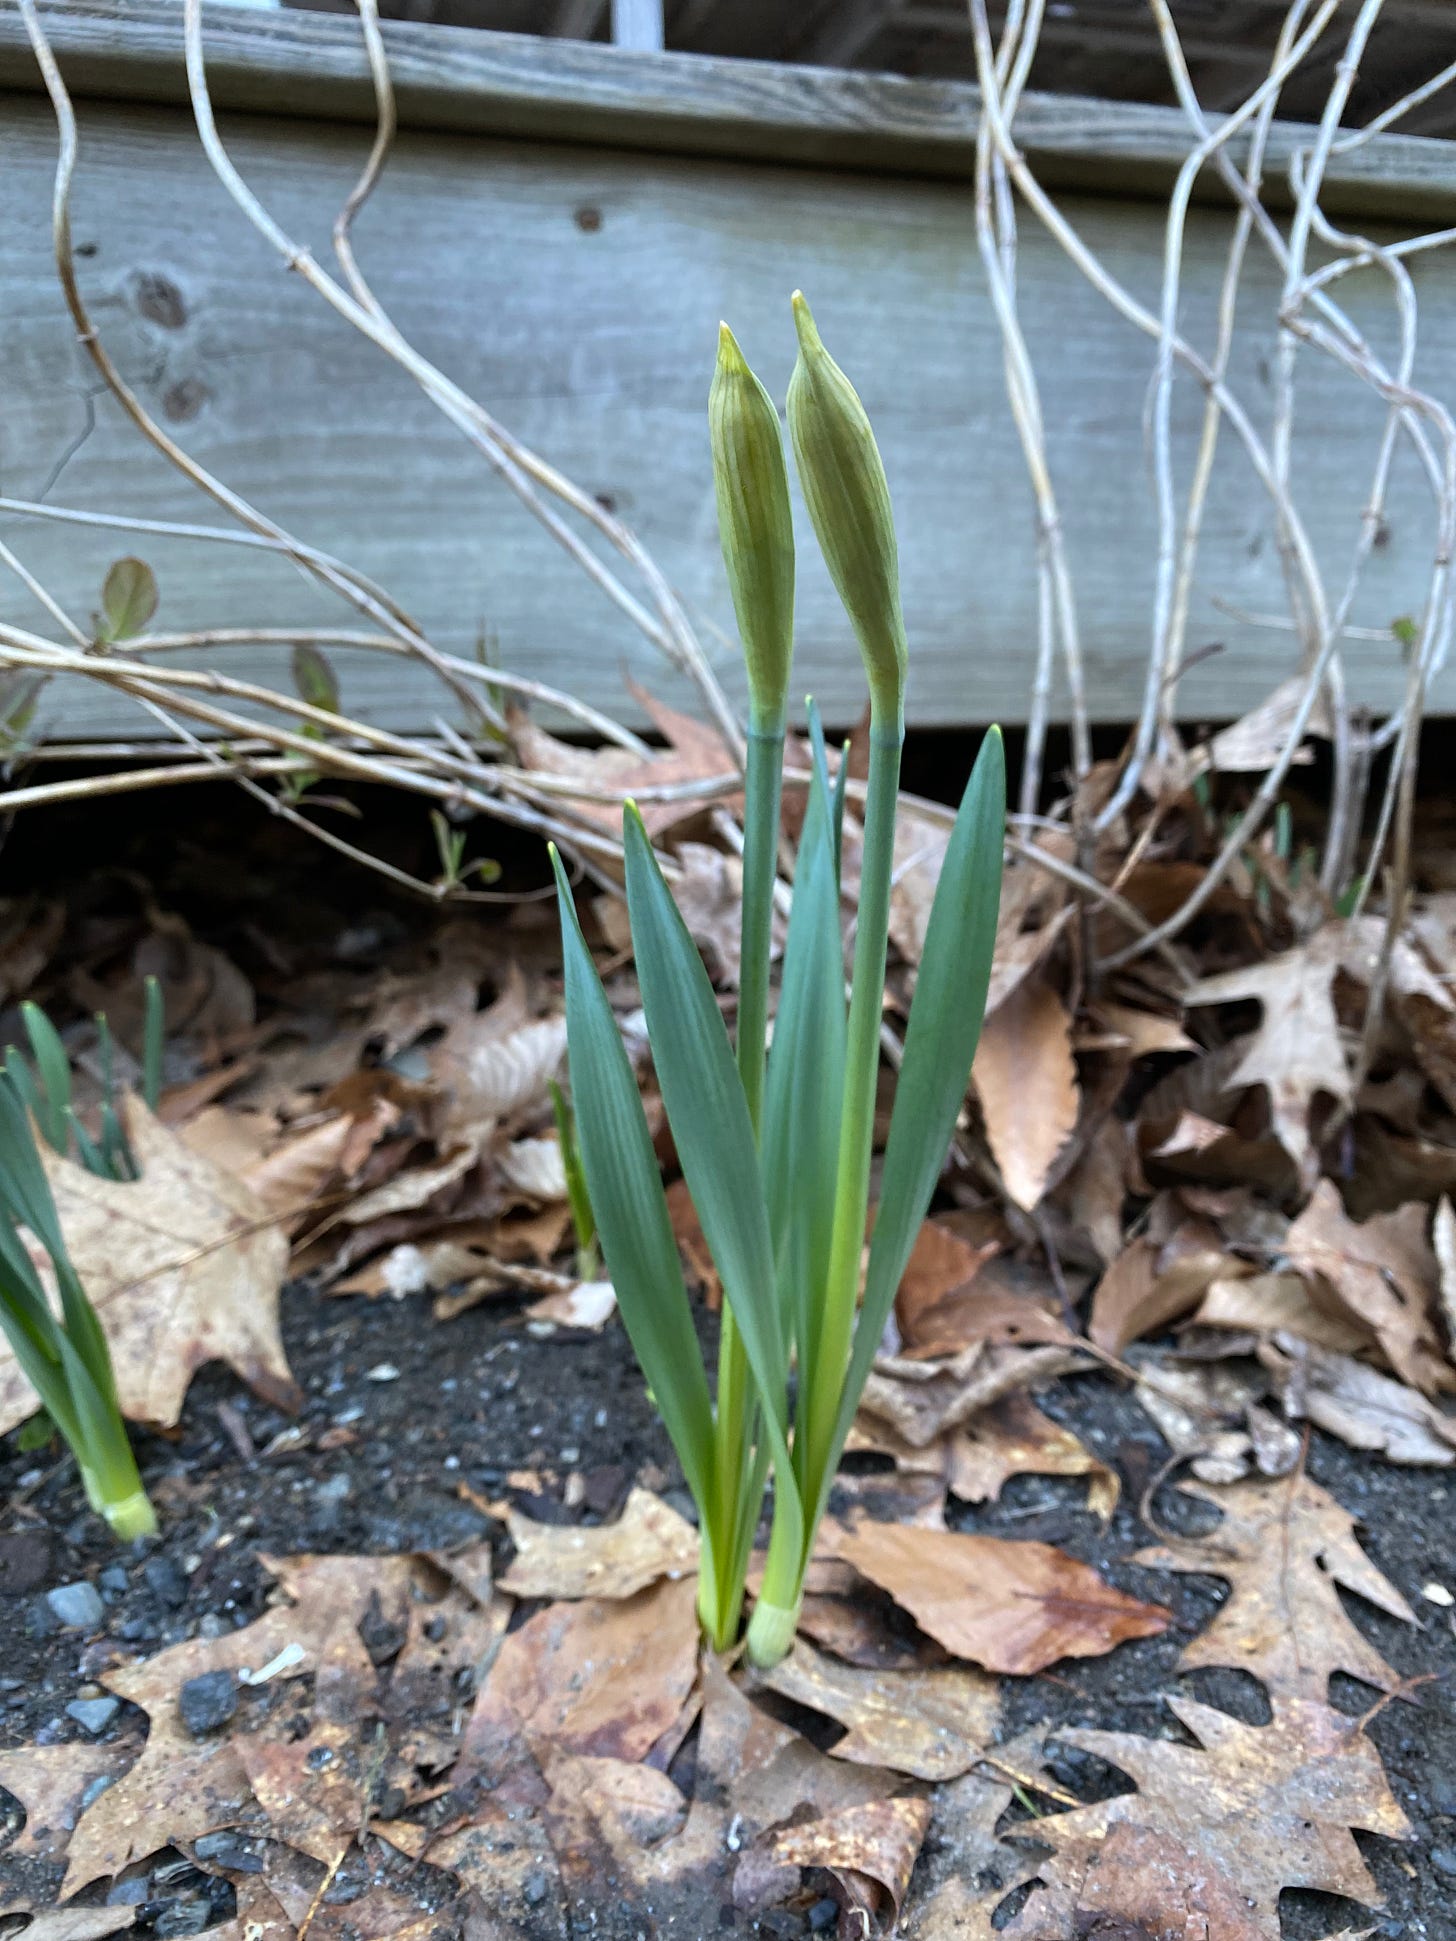 Two daffodils with fat green buds at their tips.